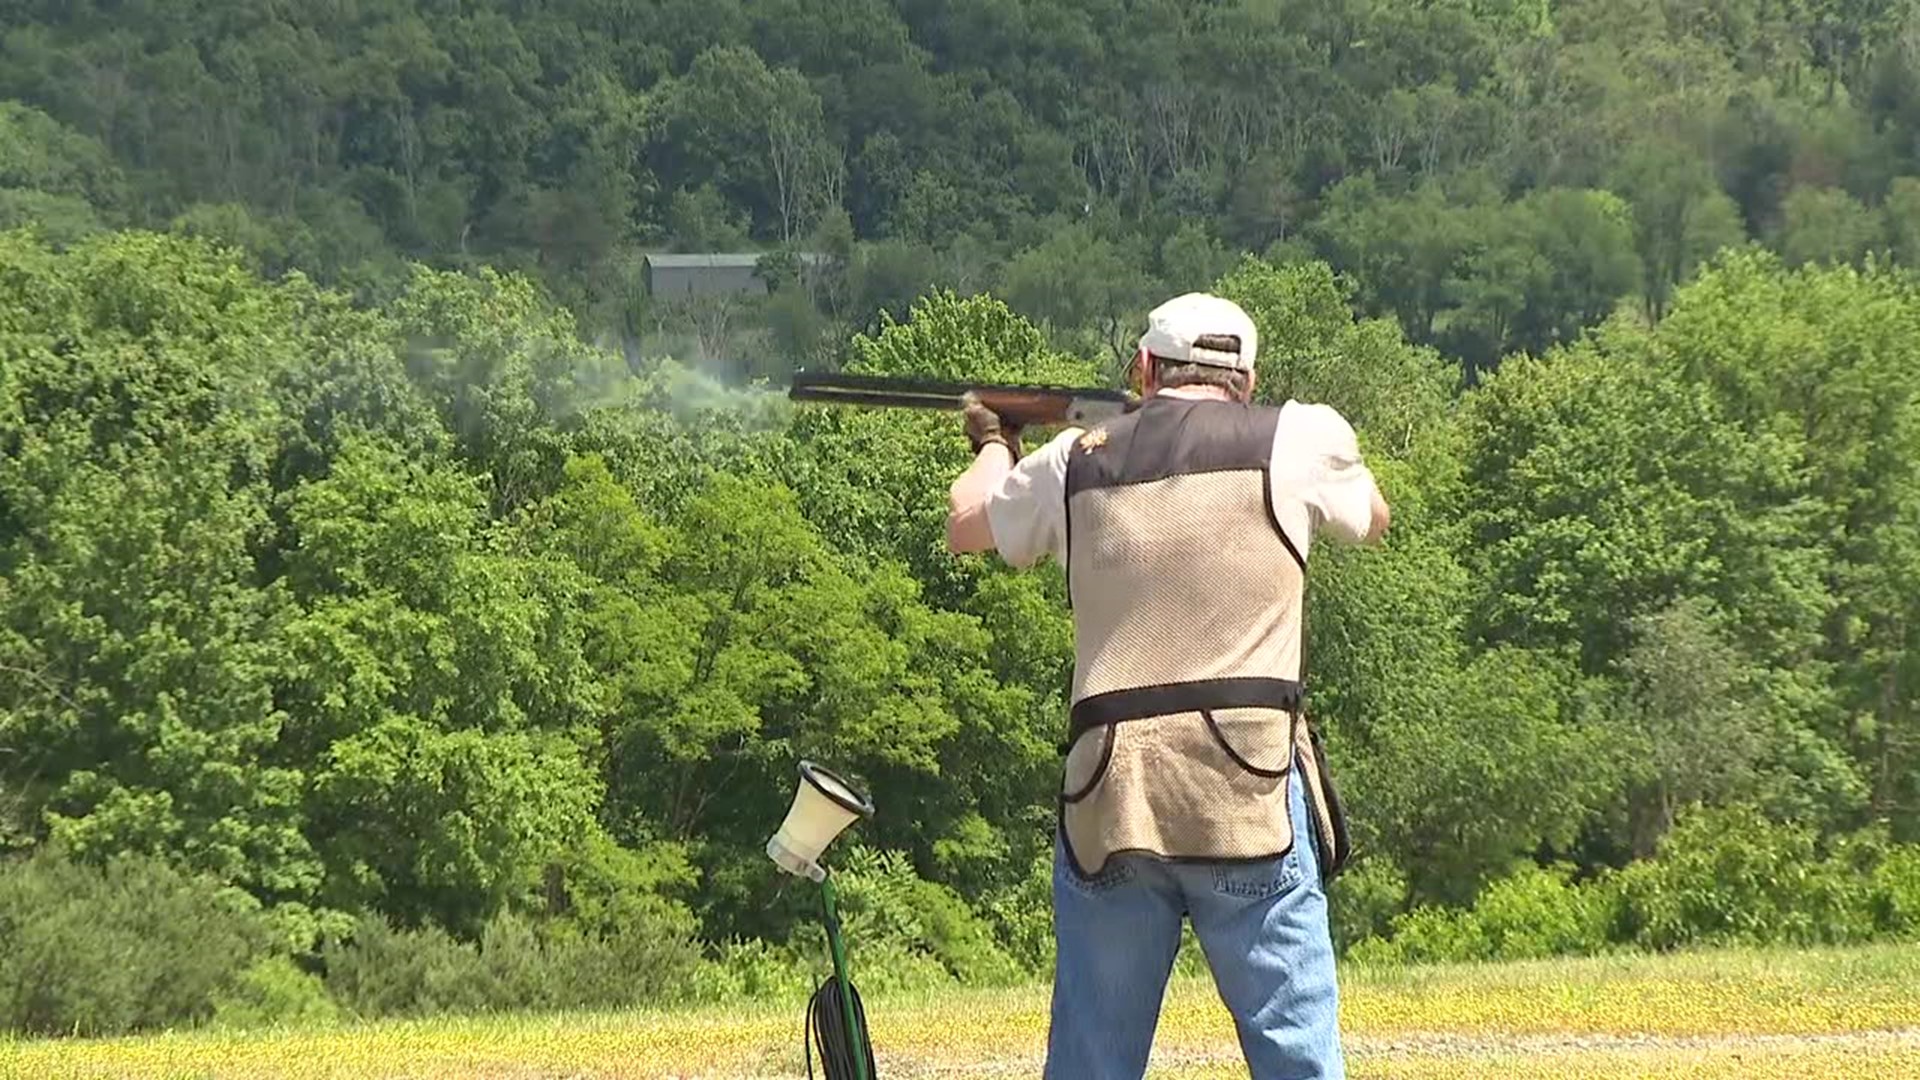 Thousands of people are now attending the annual trap shooting event in Elysburg.